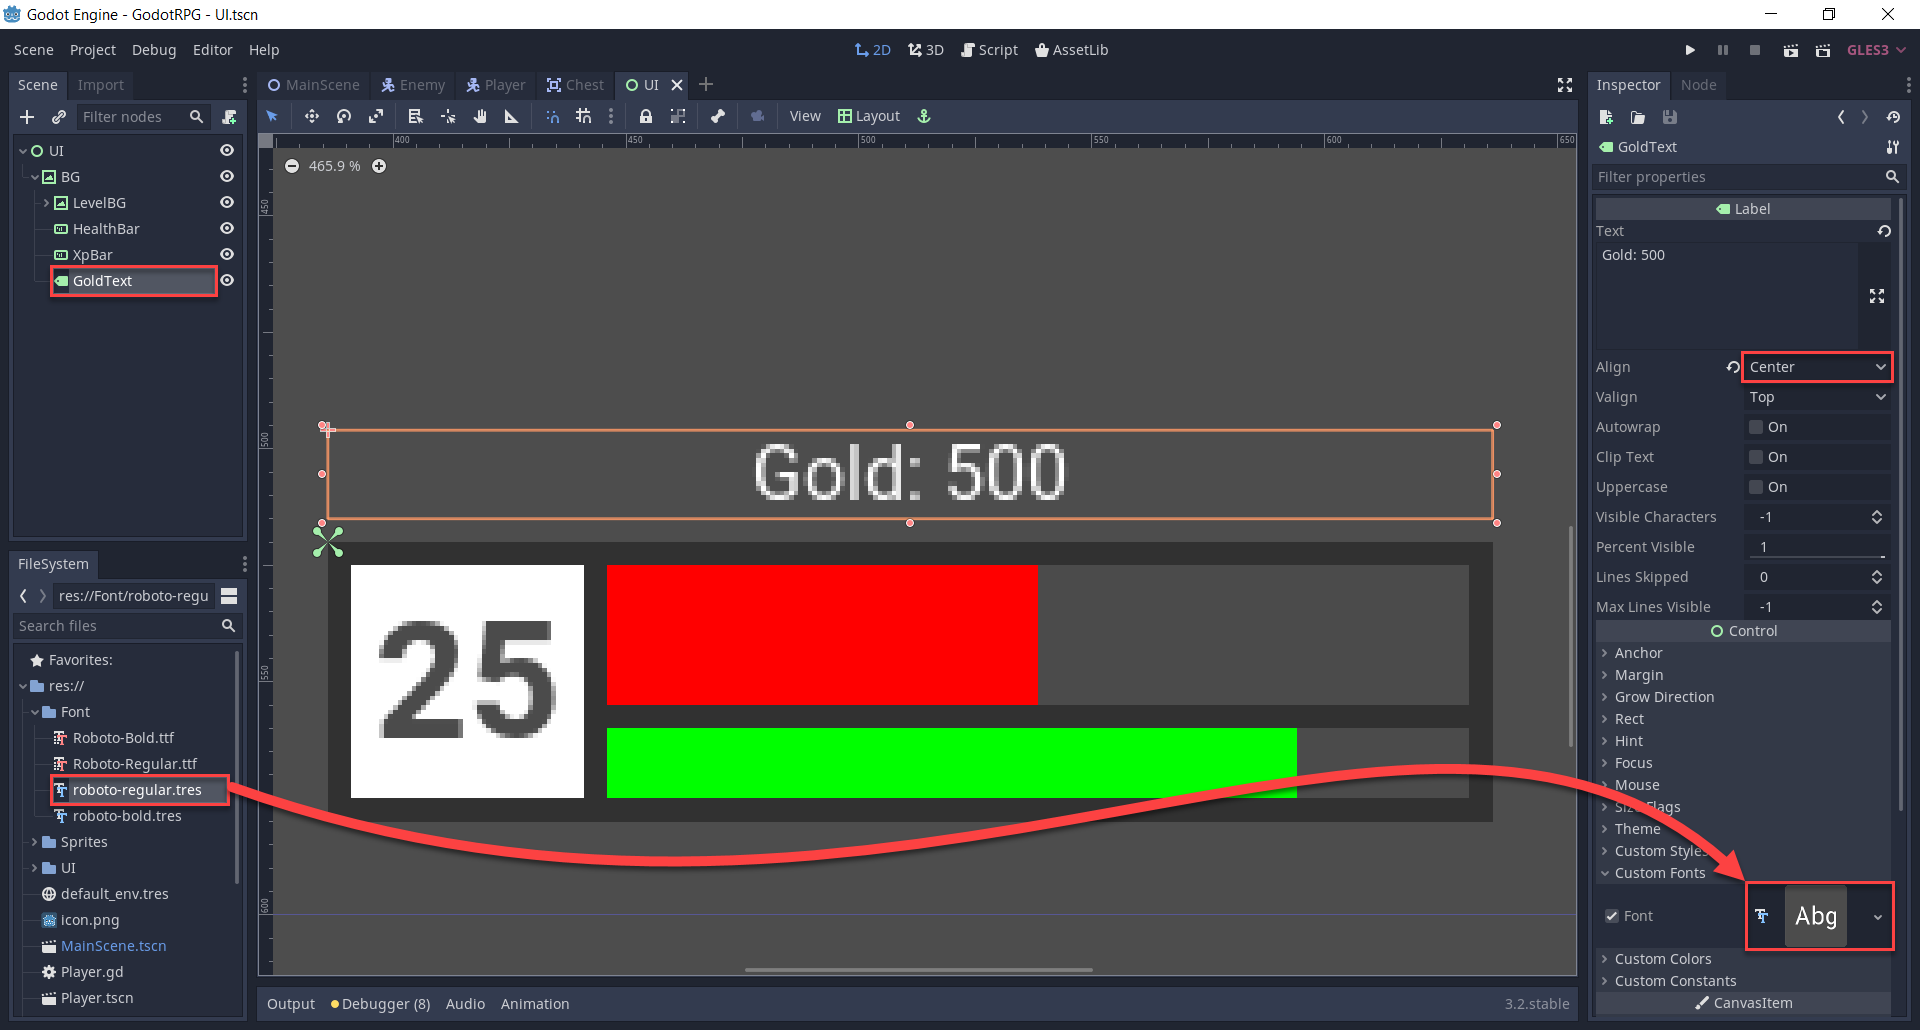 Godot UI with Text for gold amount added